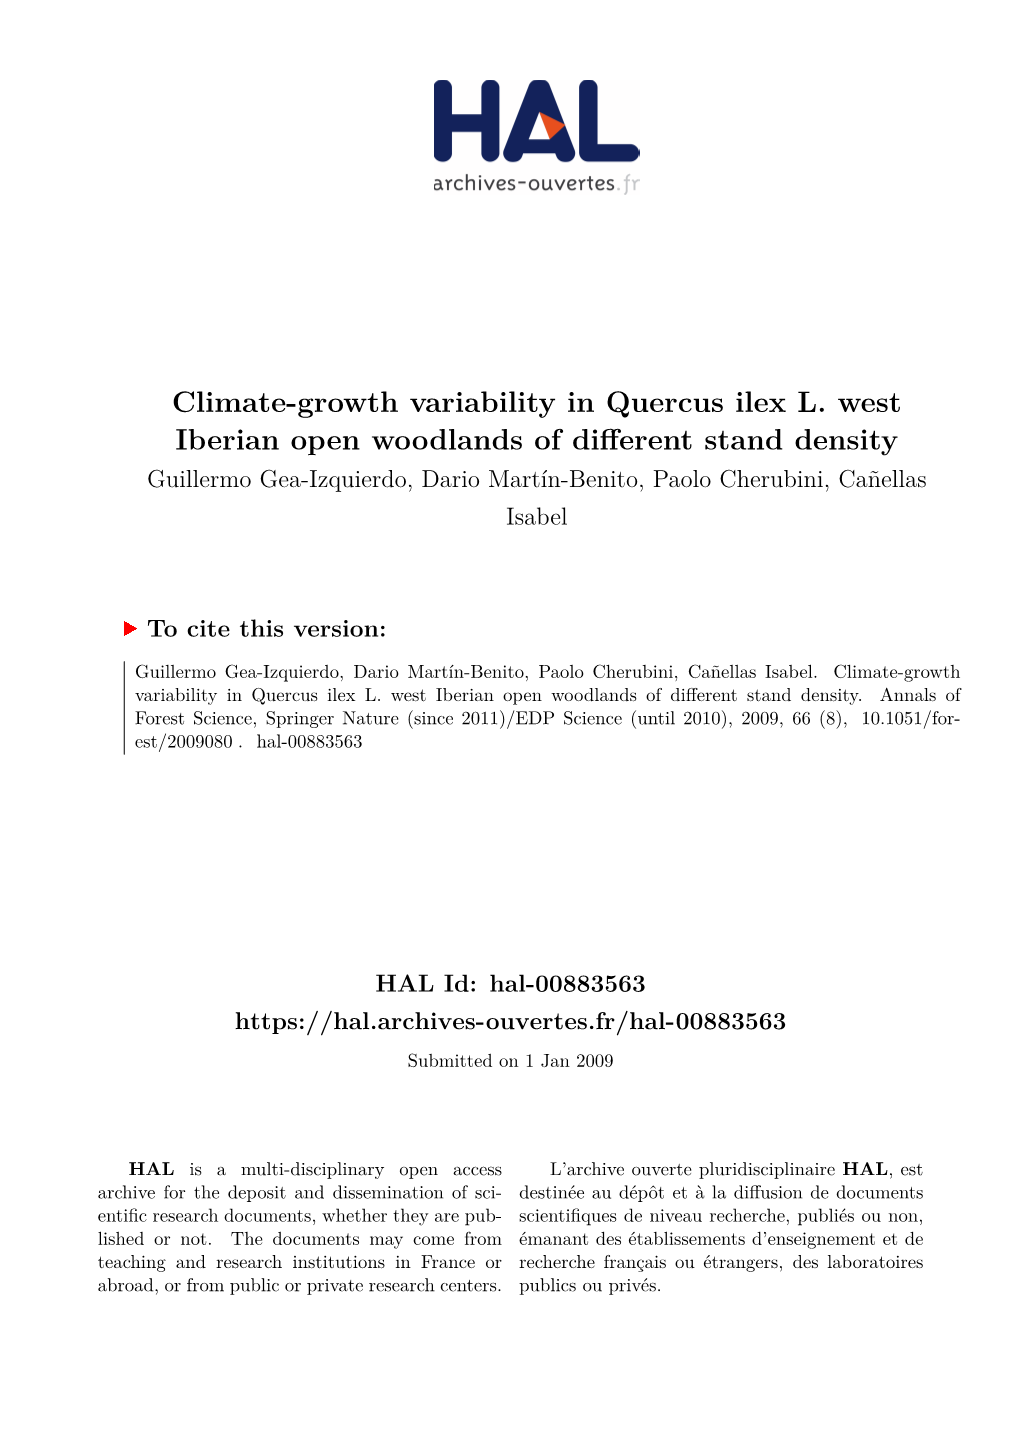 Climate-Growth Variability in Quercus Ilex L. West Iberian Open Woodlands